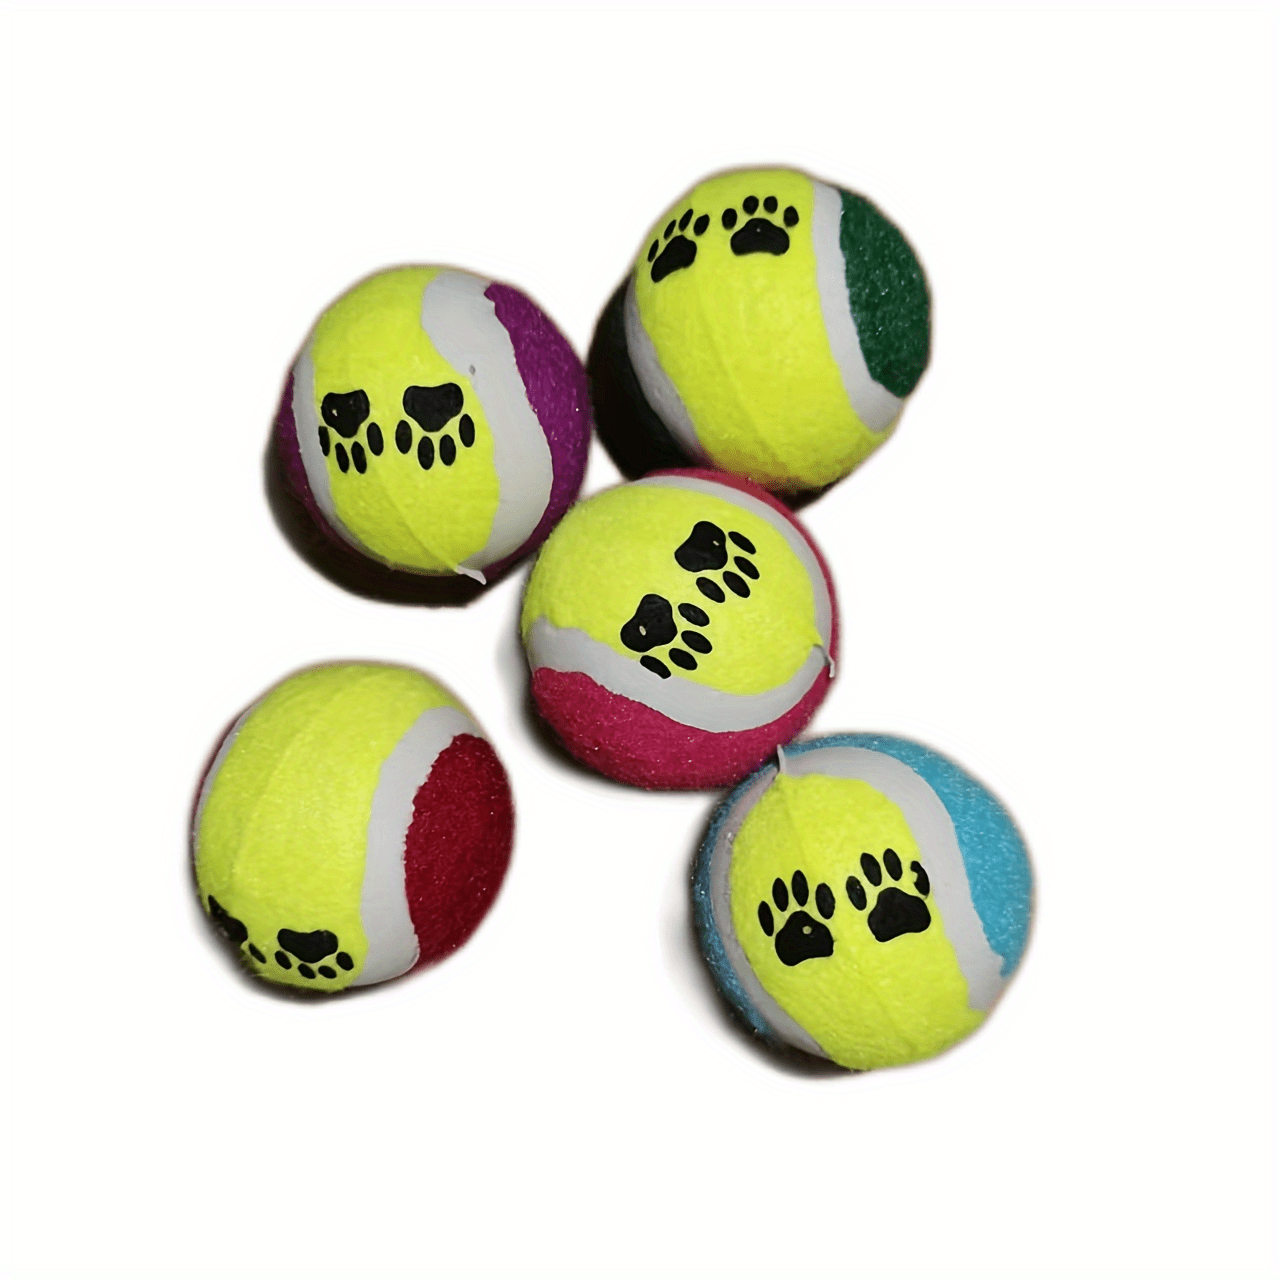 Tennis Balls For Dogs, Thrower Toy Balls For Dogs